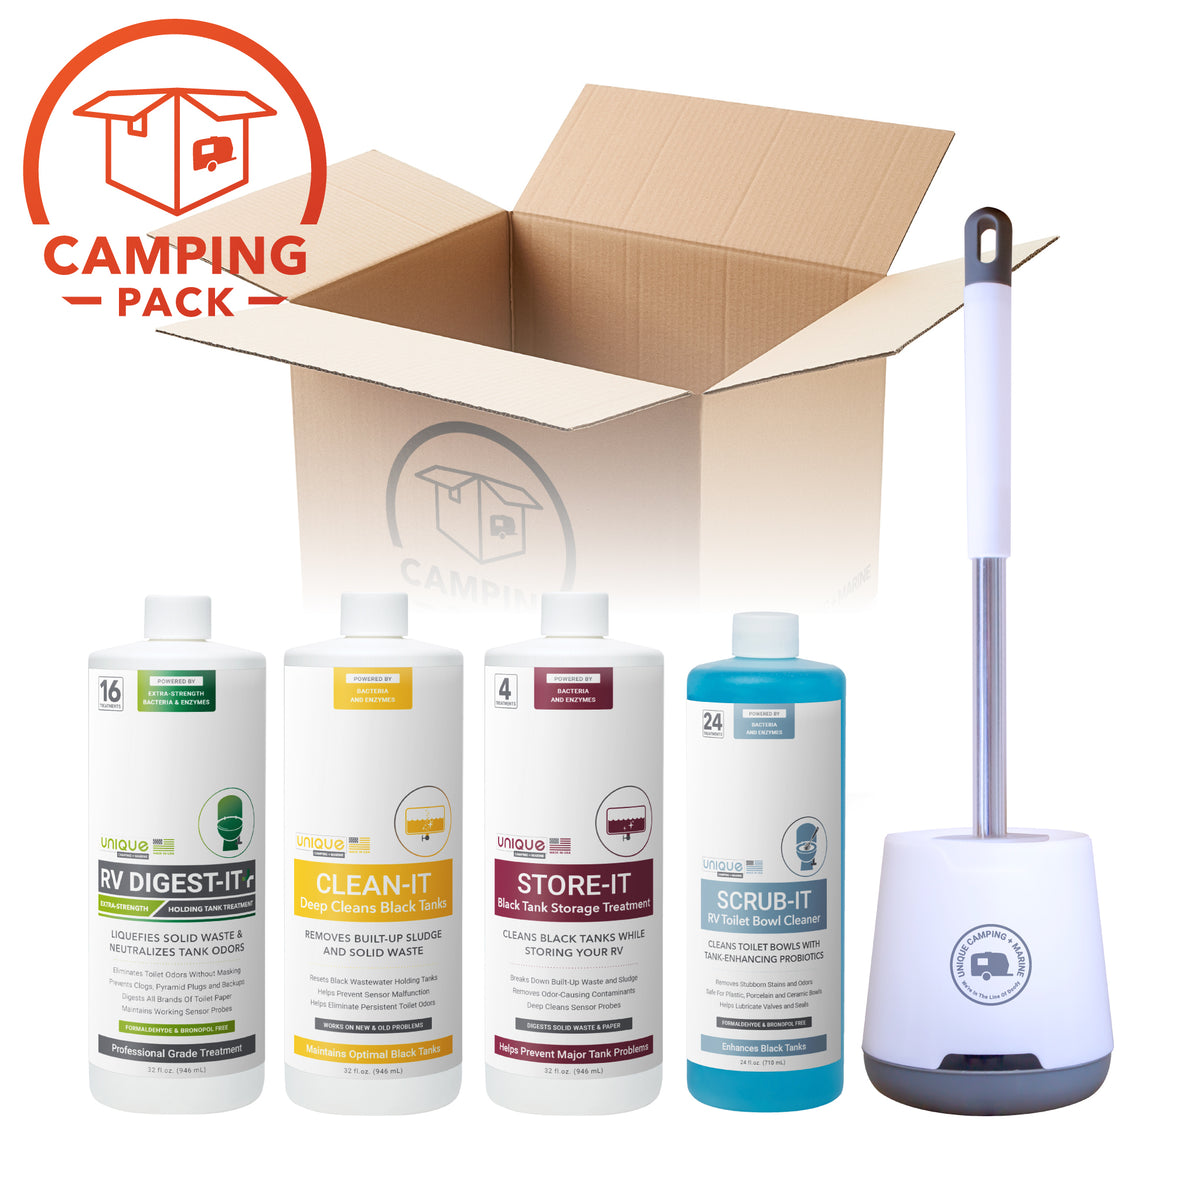 Weekend Warrior Kit with RV Digest-It, Clean-It, Store-It, Scrub-It and RV Toilet Brush